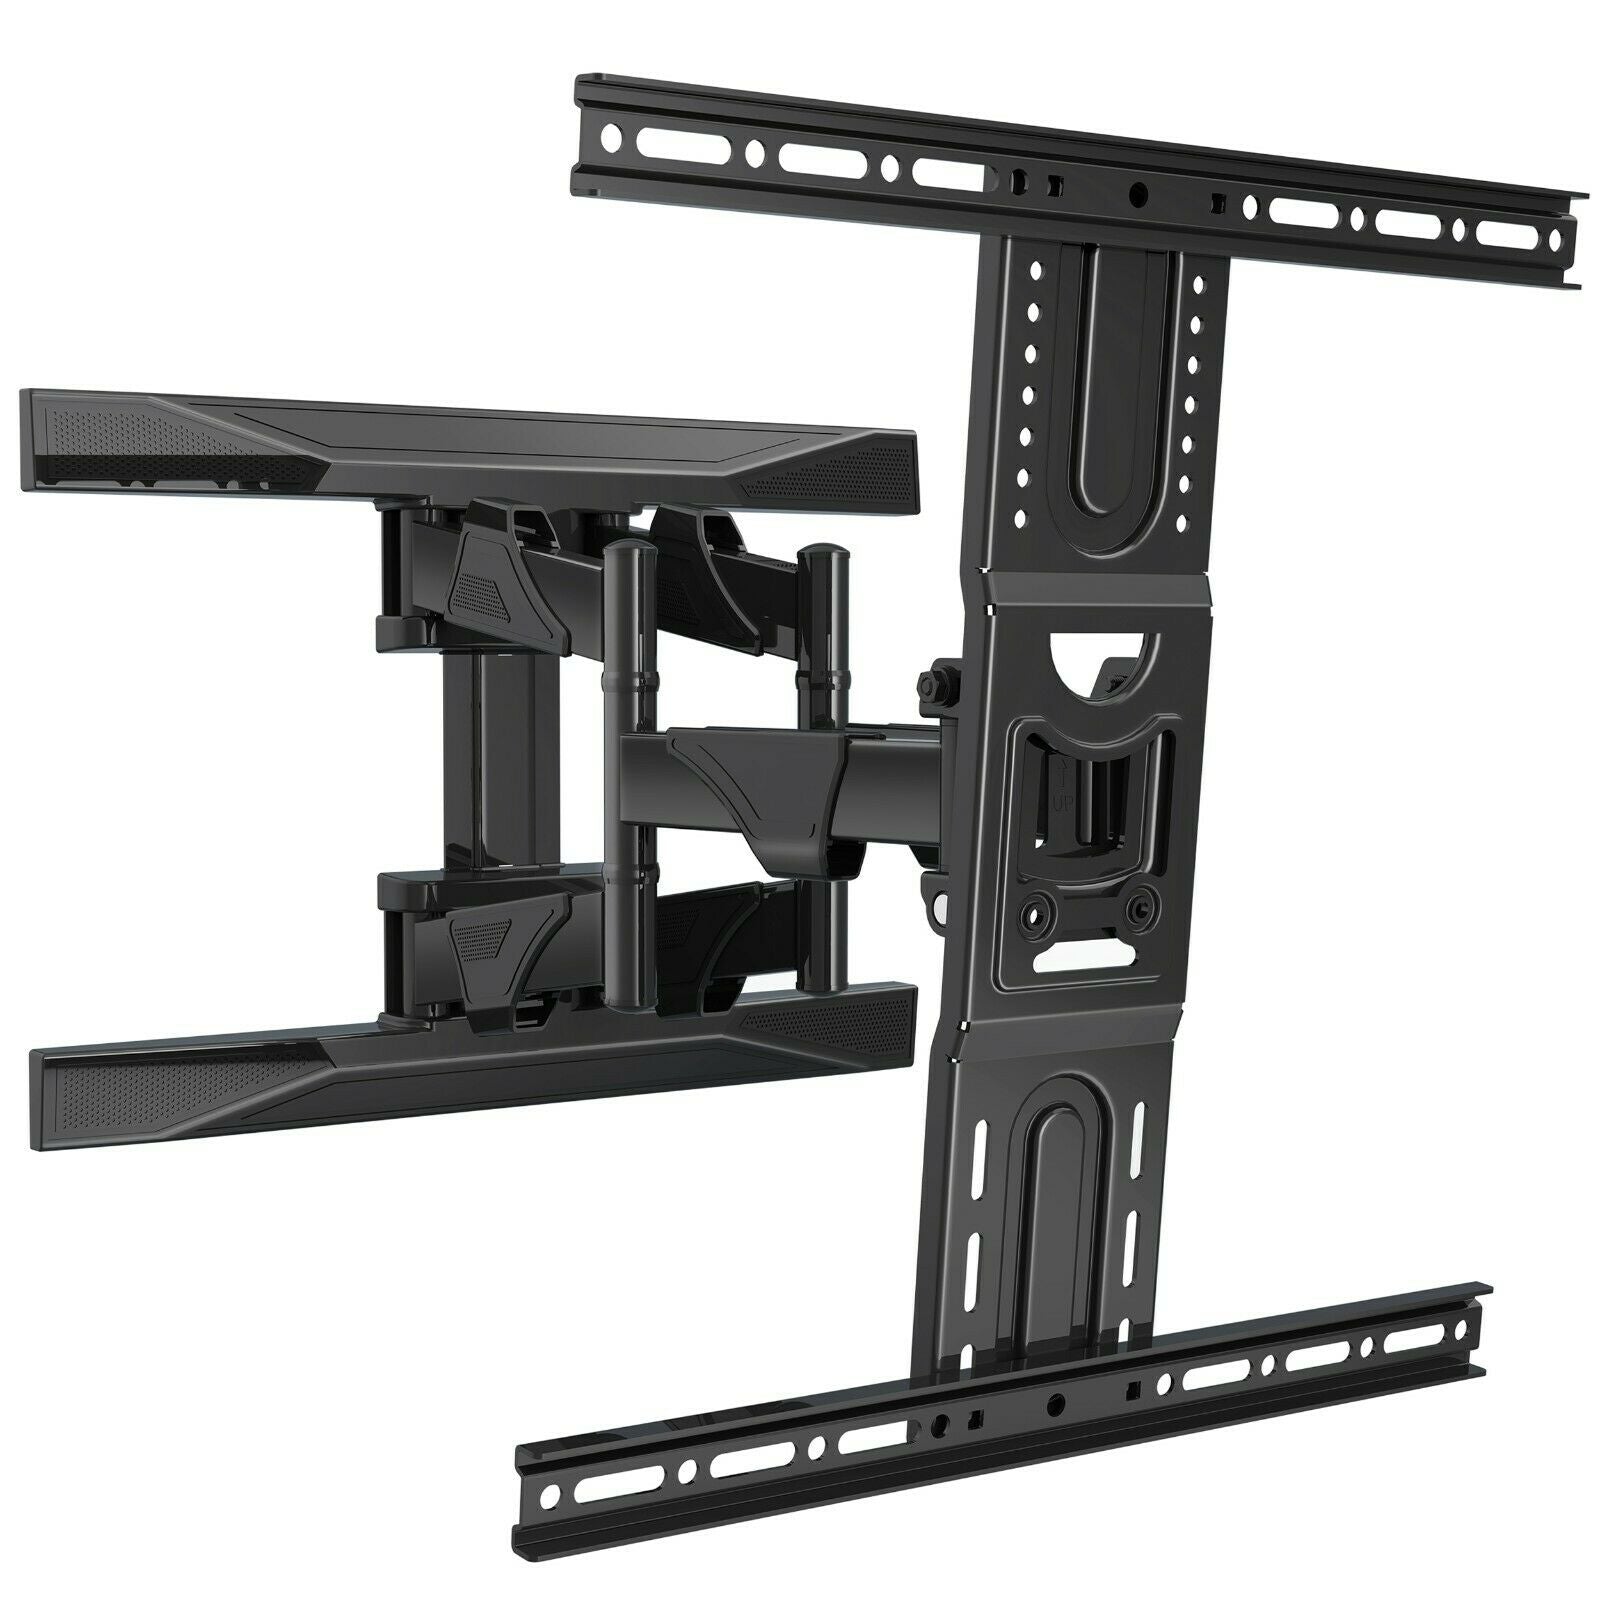 Invision EV600 TV Wall Mount Bracket for 37-65 inch TVs VESA 200x200mm to 400x400mm Weight Capacity 45.5KG